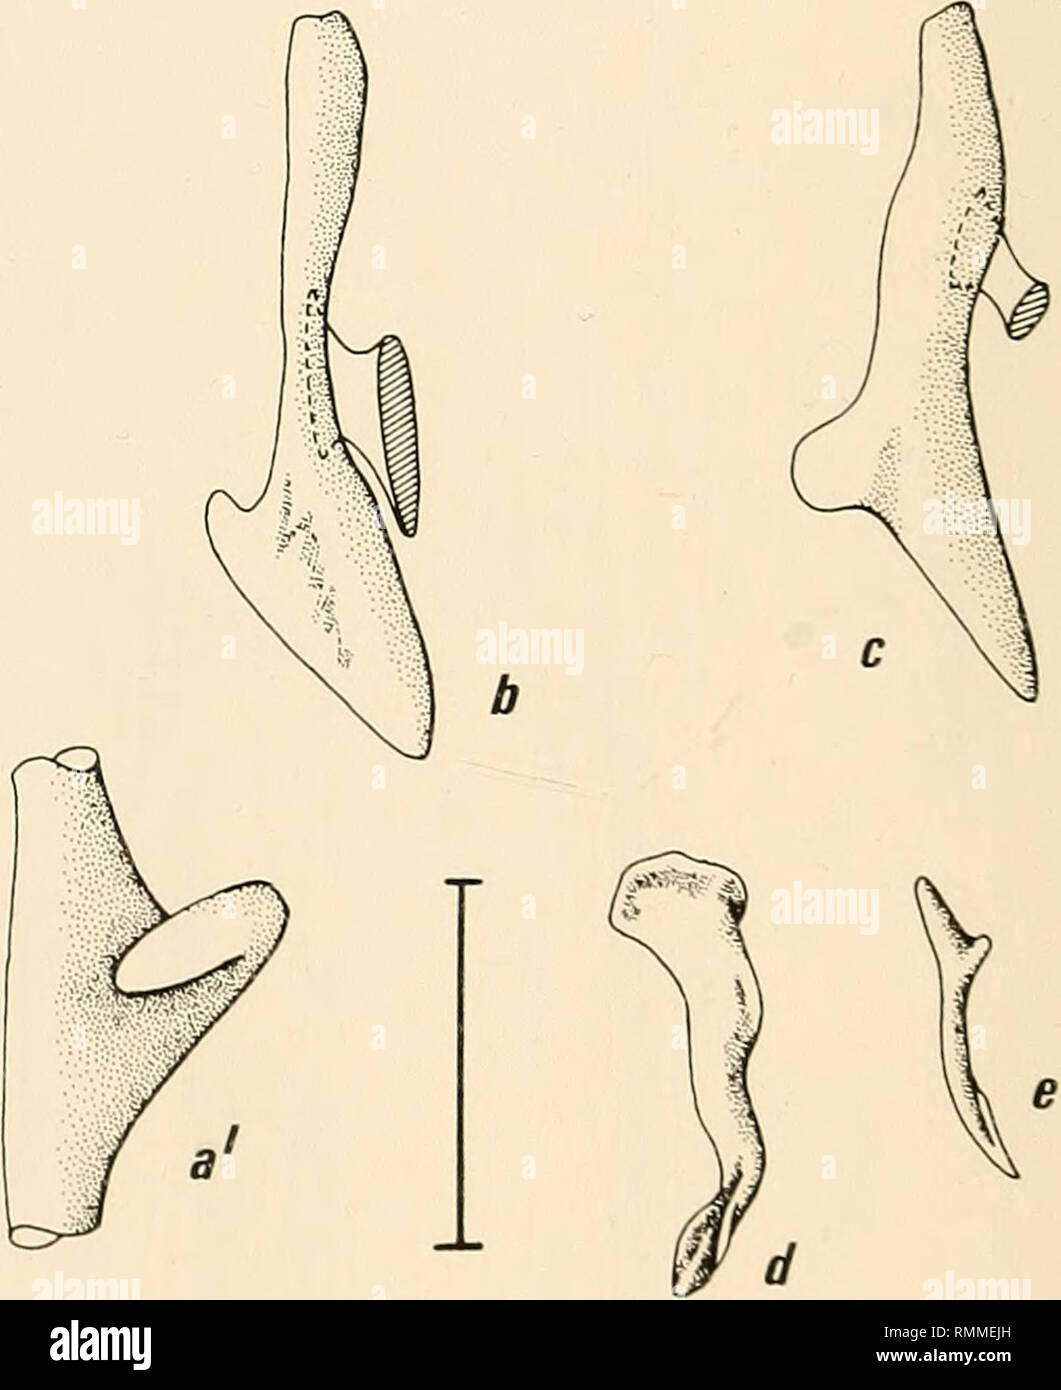 . Annals of the South African Museum = Annale van die Suid-Afrikaanse Museum. Natural history. Fig. 27. Ventral view of accessory terminal 2 cartilage. Scale 1,0 cm. a. Cruriraja parcomacidata; a^. C. parcomaculata (dorsal view); b. C. triangularis; c. C. rugosa; d. Anacanthobatis marmoratus; e. A. americanus. In the genus Cruriraja (Figs 27 a-c), the cartilage is elongate, and in the three species examined a lateral process was found. Distally the cartilage is rounded. A similarly shaped accessory terminal 2 cartilage is found in Anacanthobatis marmoratus (Fig. 27 d), except that there is no  Stock Photo